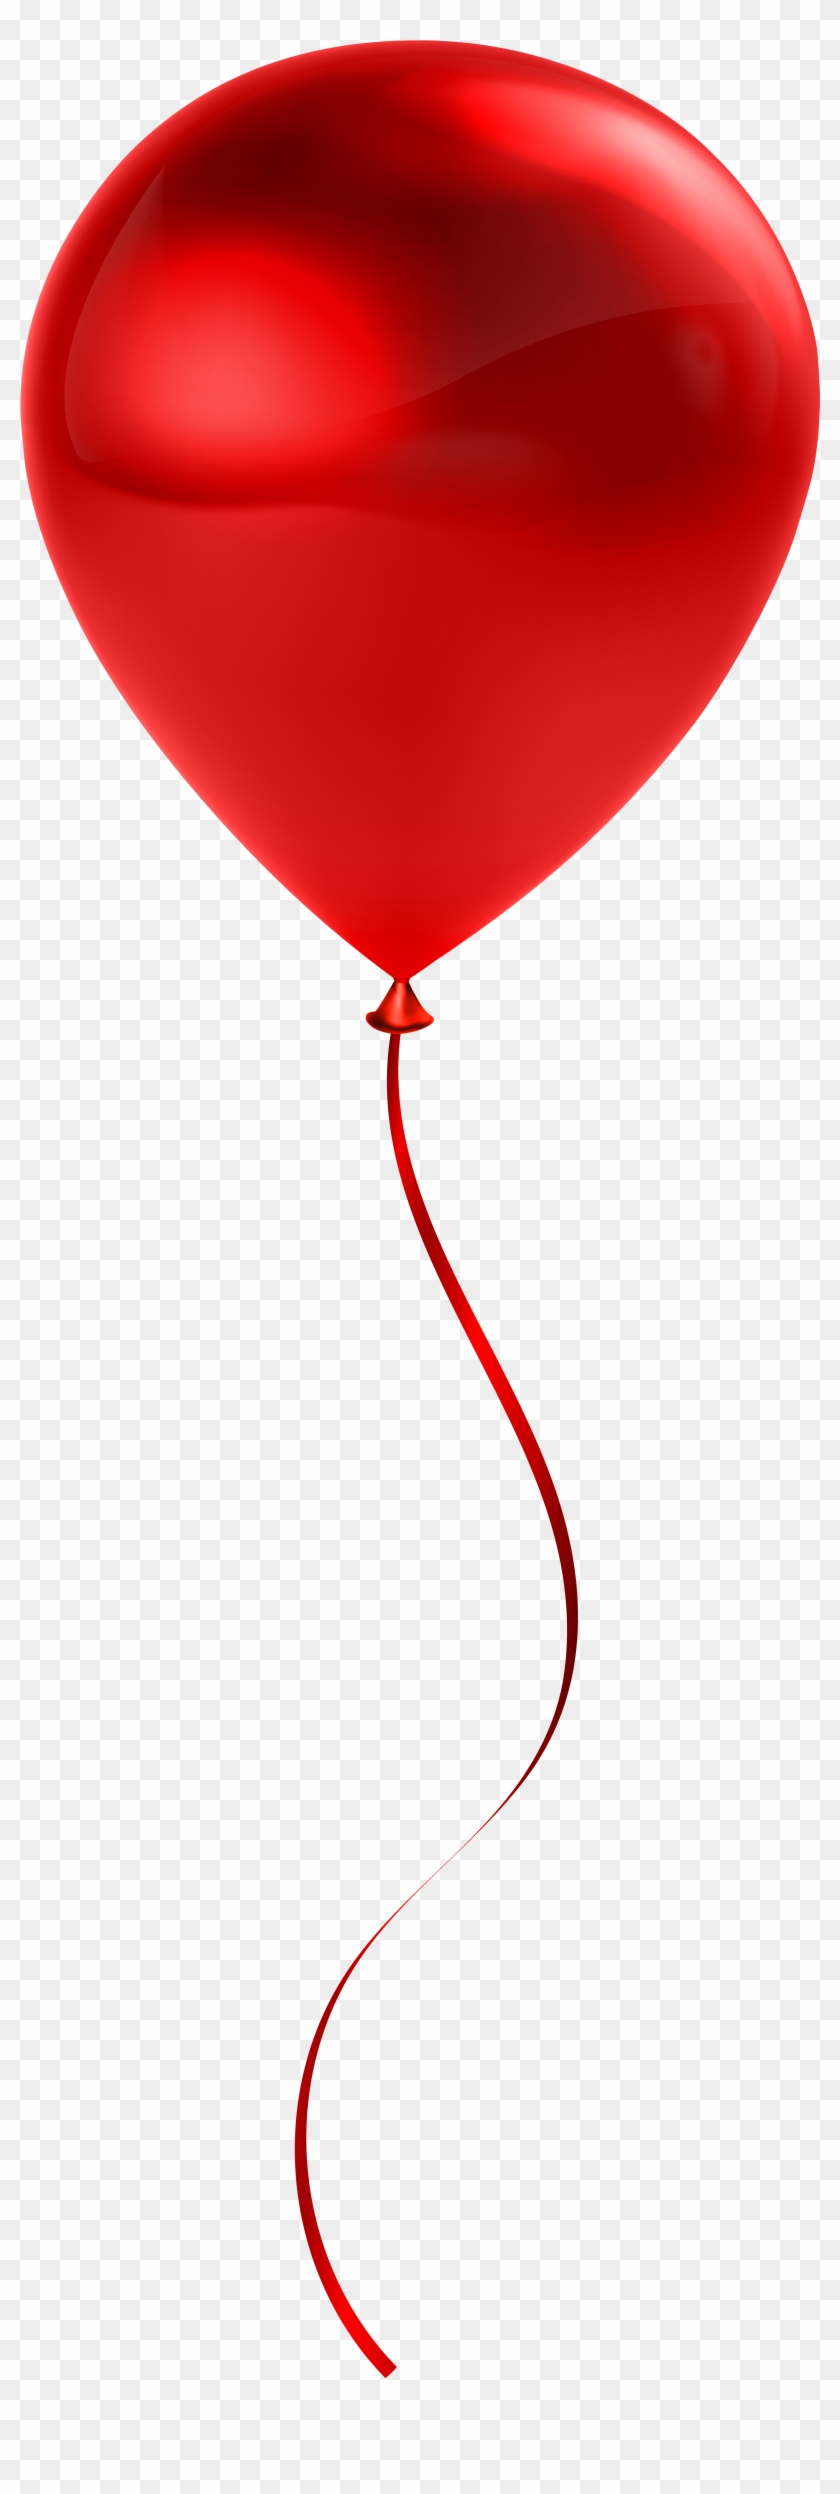 Red Clipart Baloon - Red Balloon Transparent Background #177789